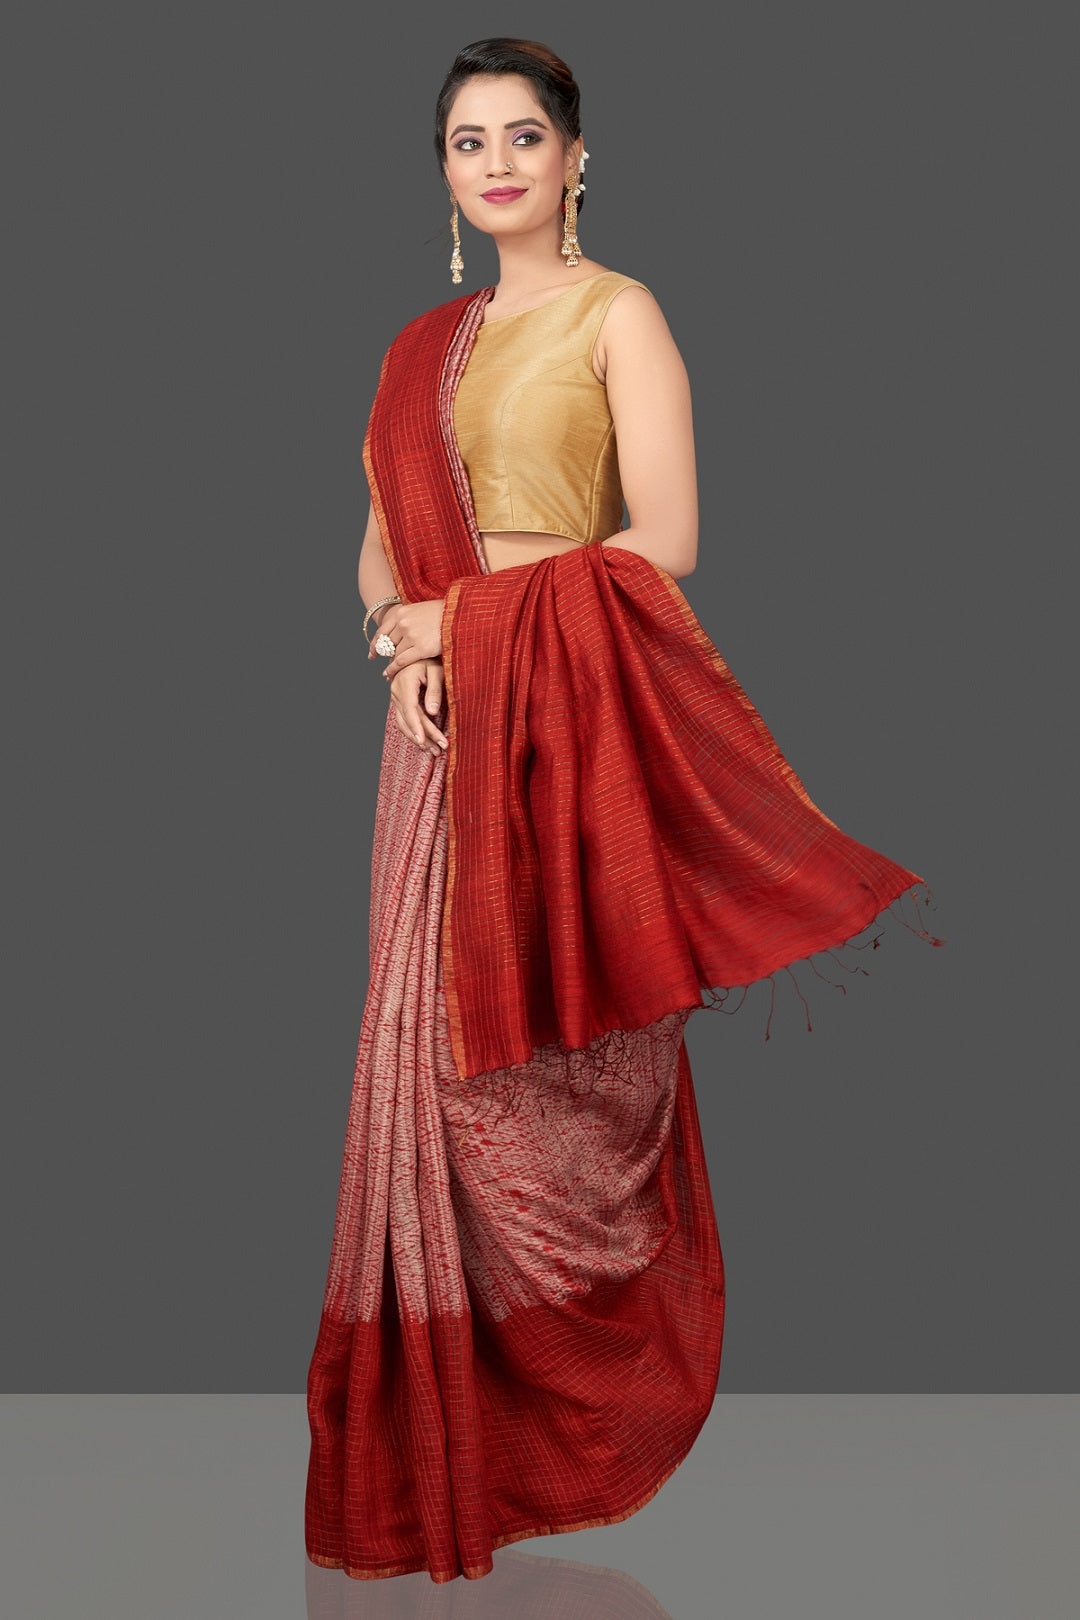 Buy stunning pink and red matka shibori saree online in USA with check zari border. Flaunt Indian fashion in USA with a stunning collection of handwoven sarees, cotton sarees, pure silk sarees, printed saris in USA from Pure Elegance Indian saree store in USA.-side